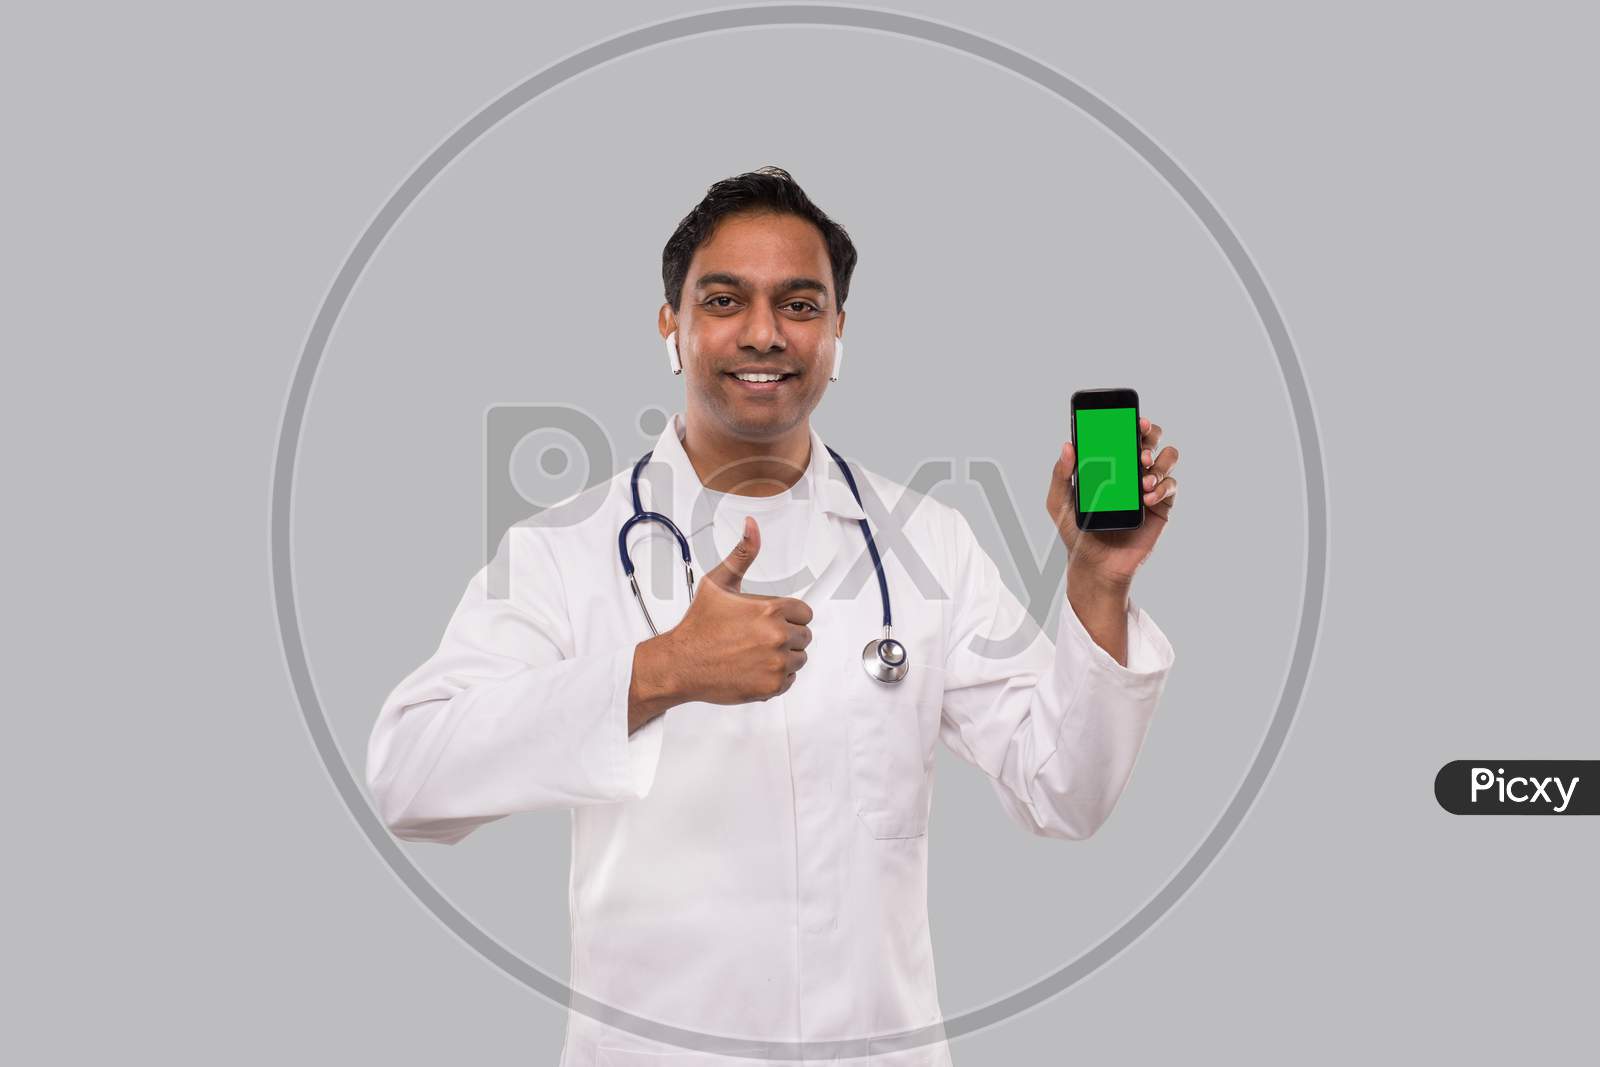 Doctor Holding Phone Showing Thumb Up Isolated. Indian Man Doctor Technology Medicine At Home. Phone Green Screen.